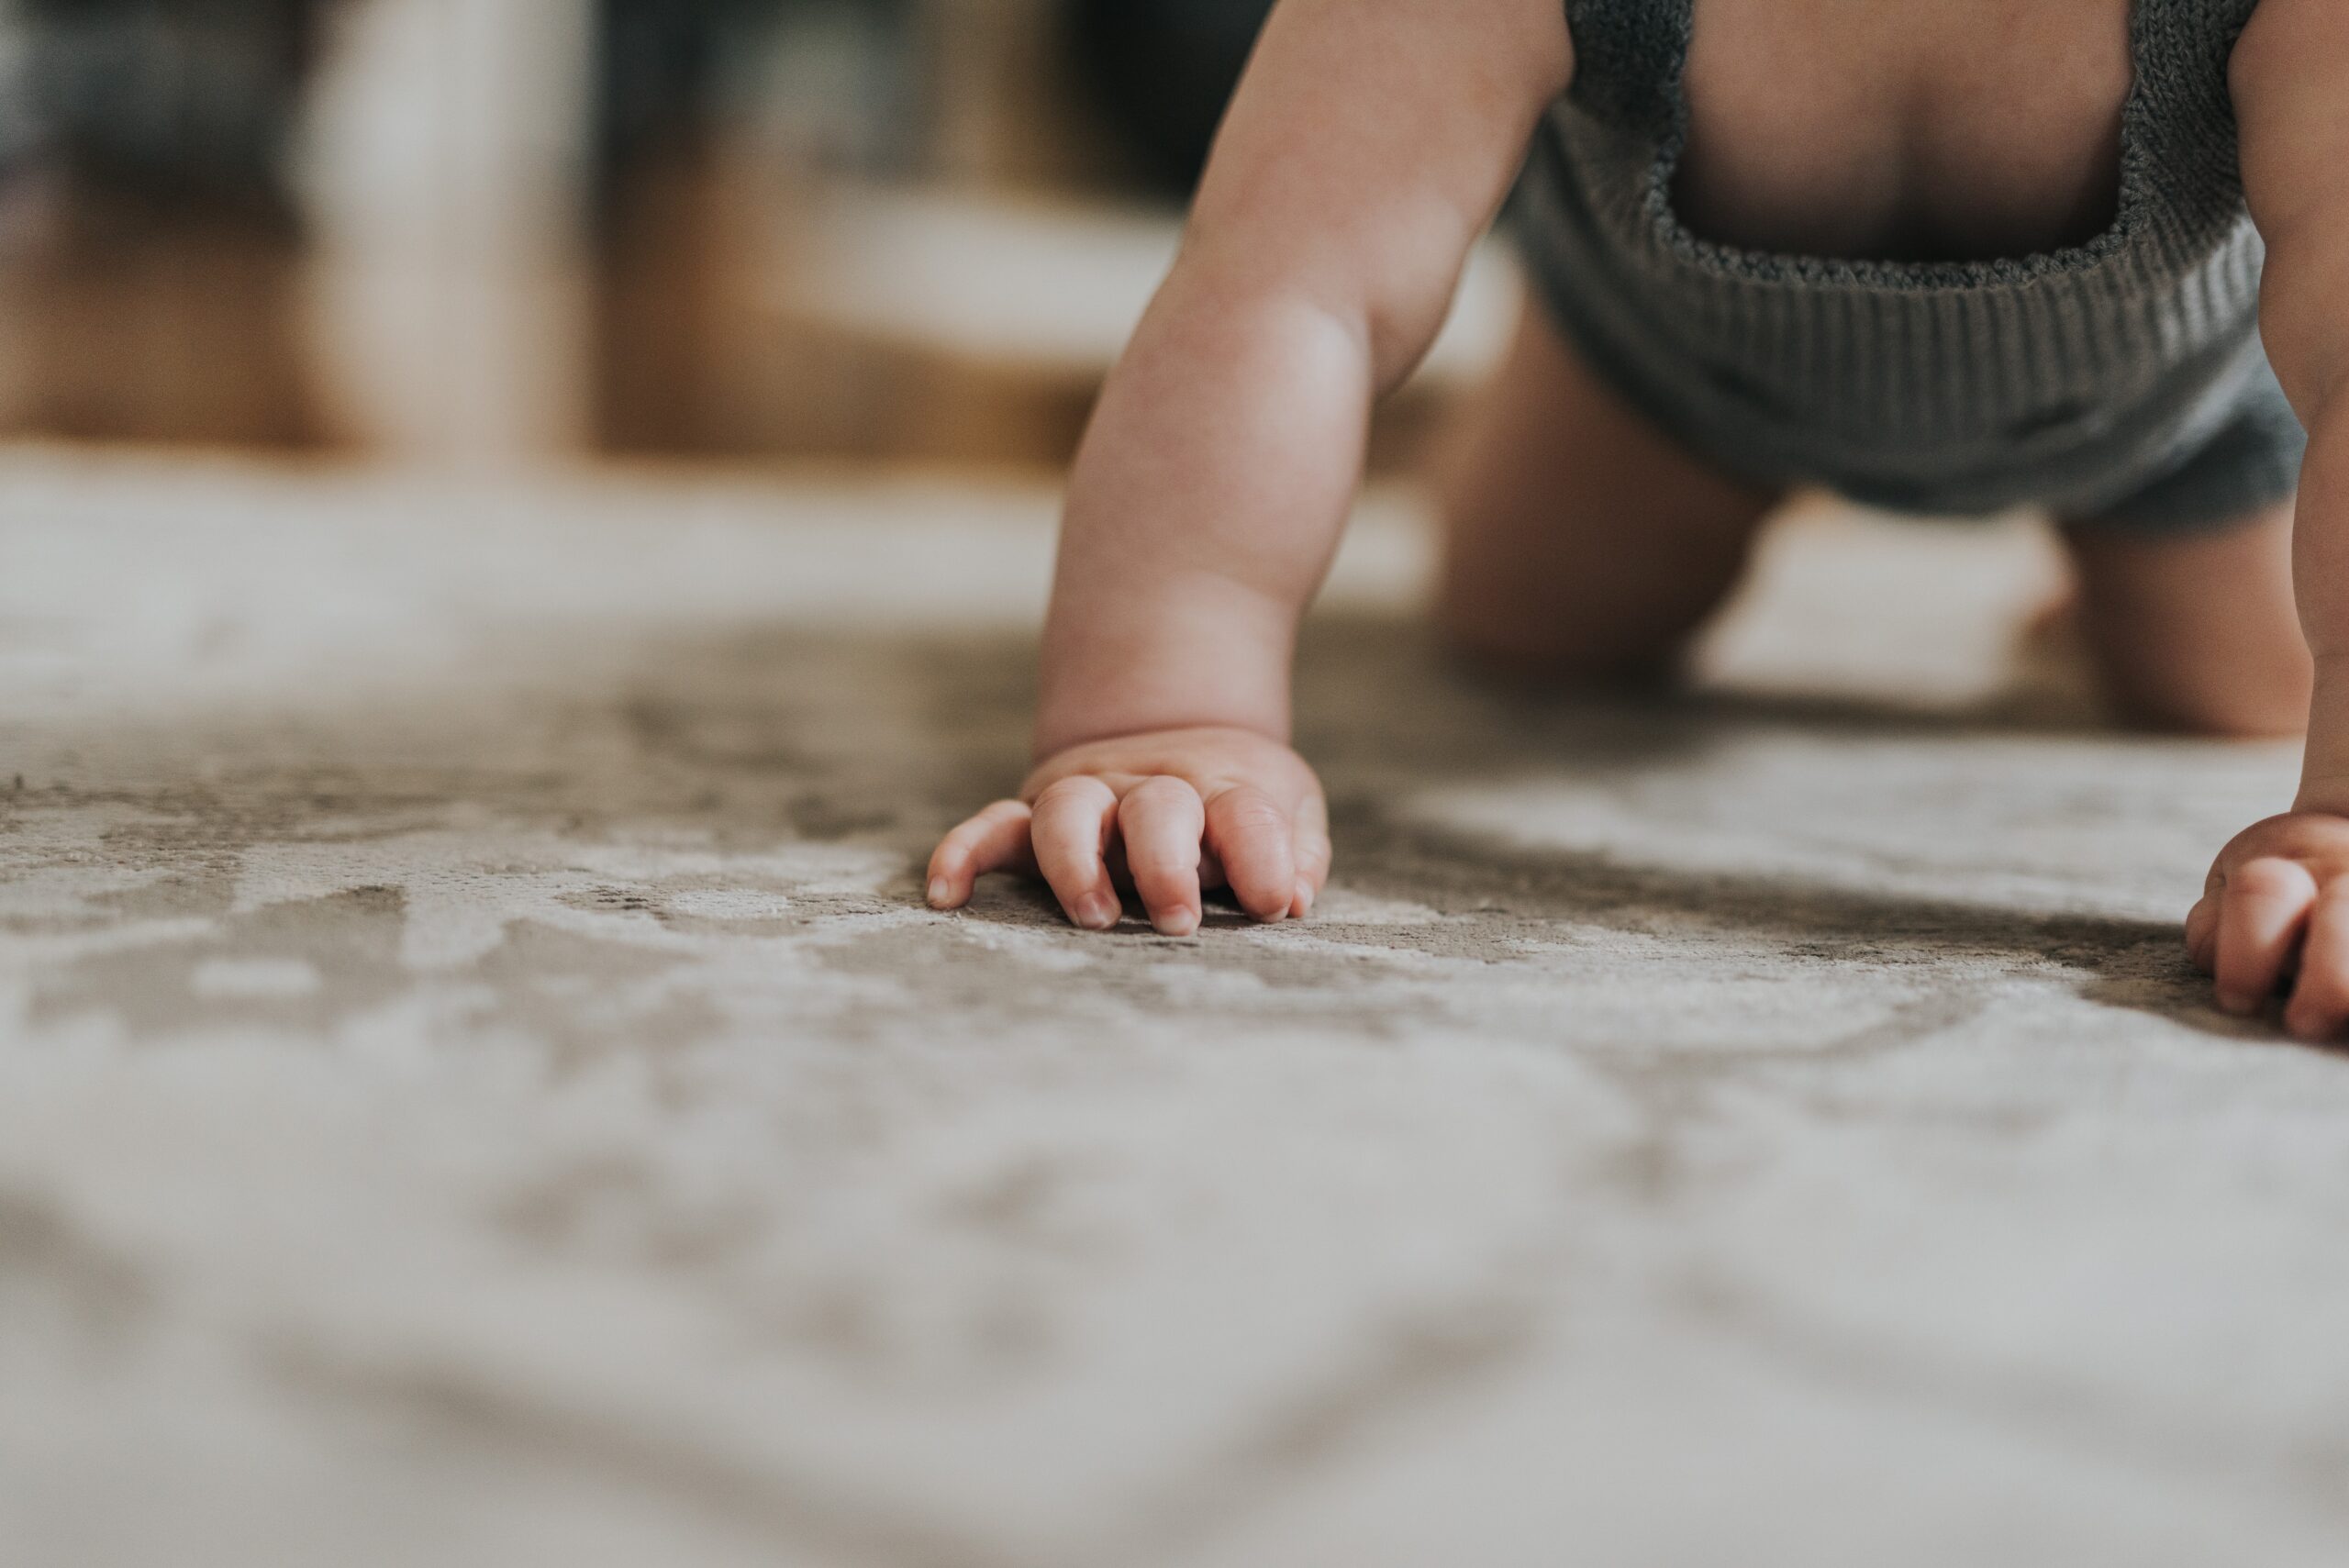 For babyproof efforts the most popular baby-friendly flooring is carpet.